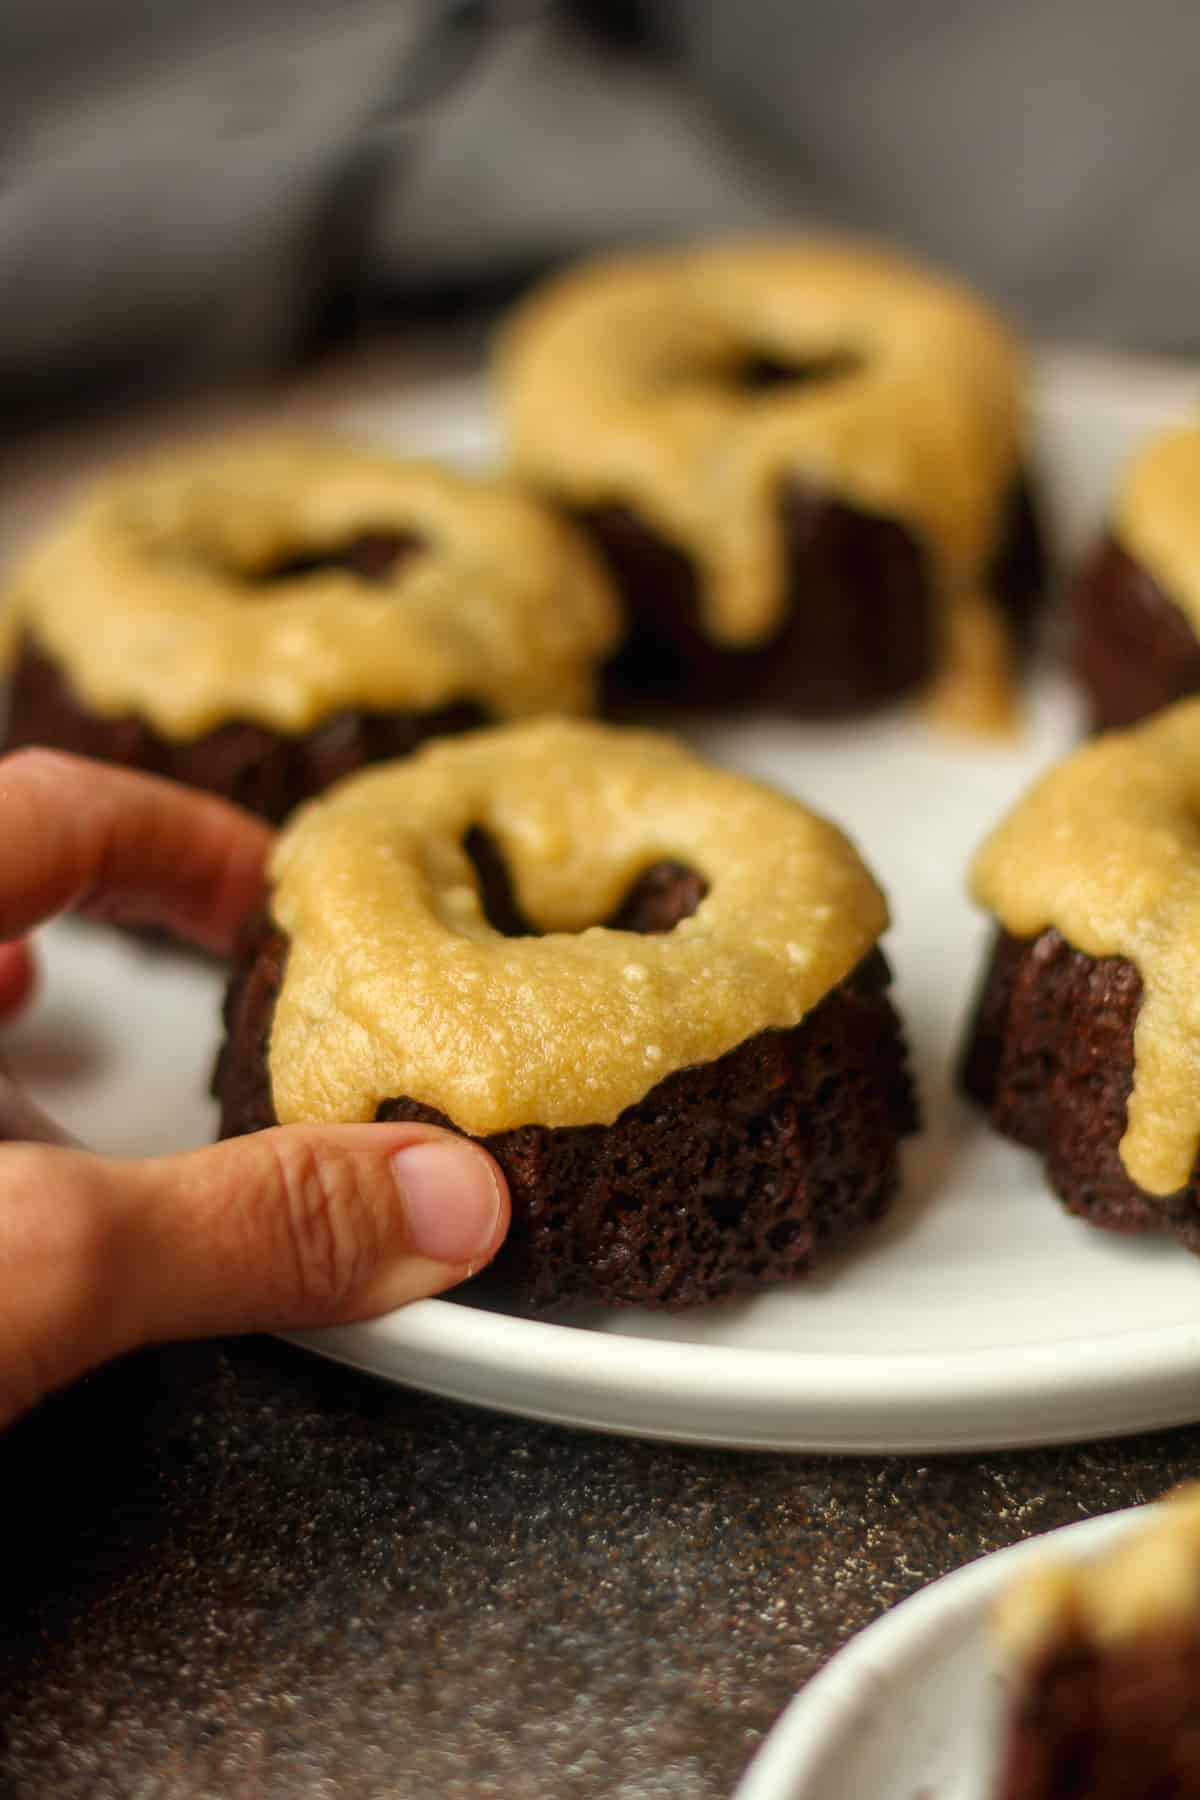 My hand grabbing a mini chocolate bundt cake from a plate.